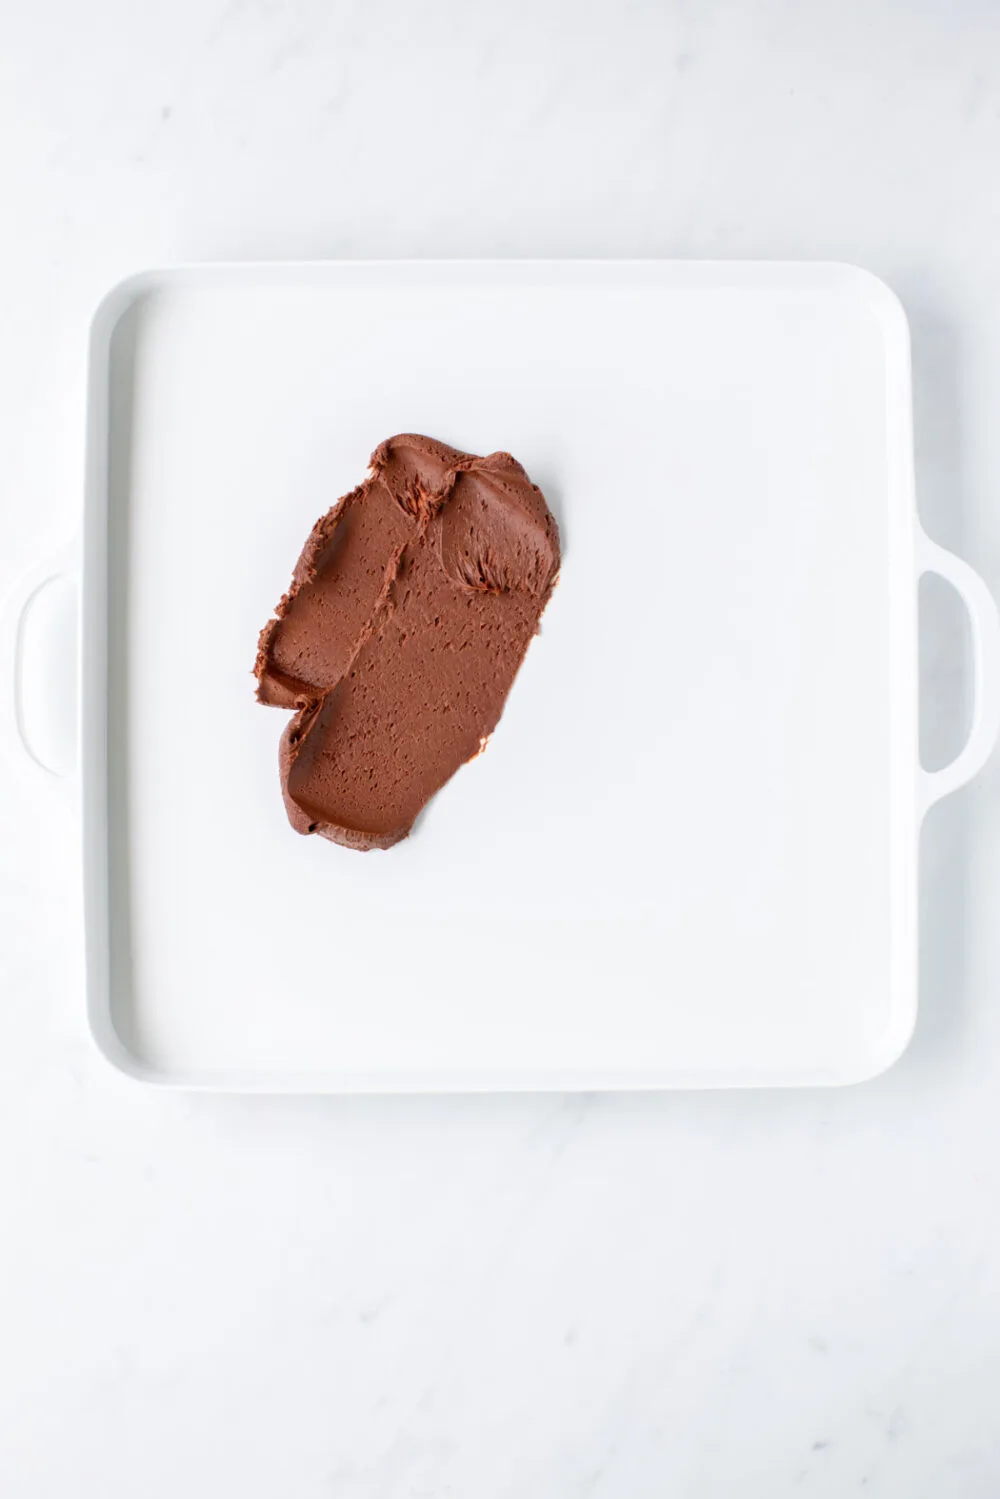 Chocolate frosting on a square serving tray. 